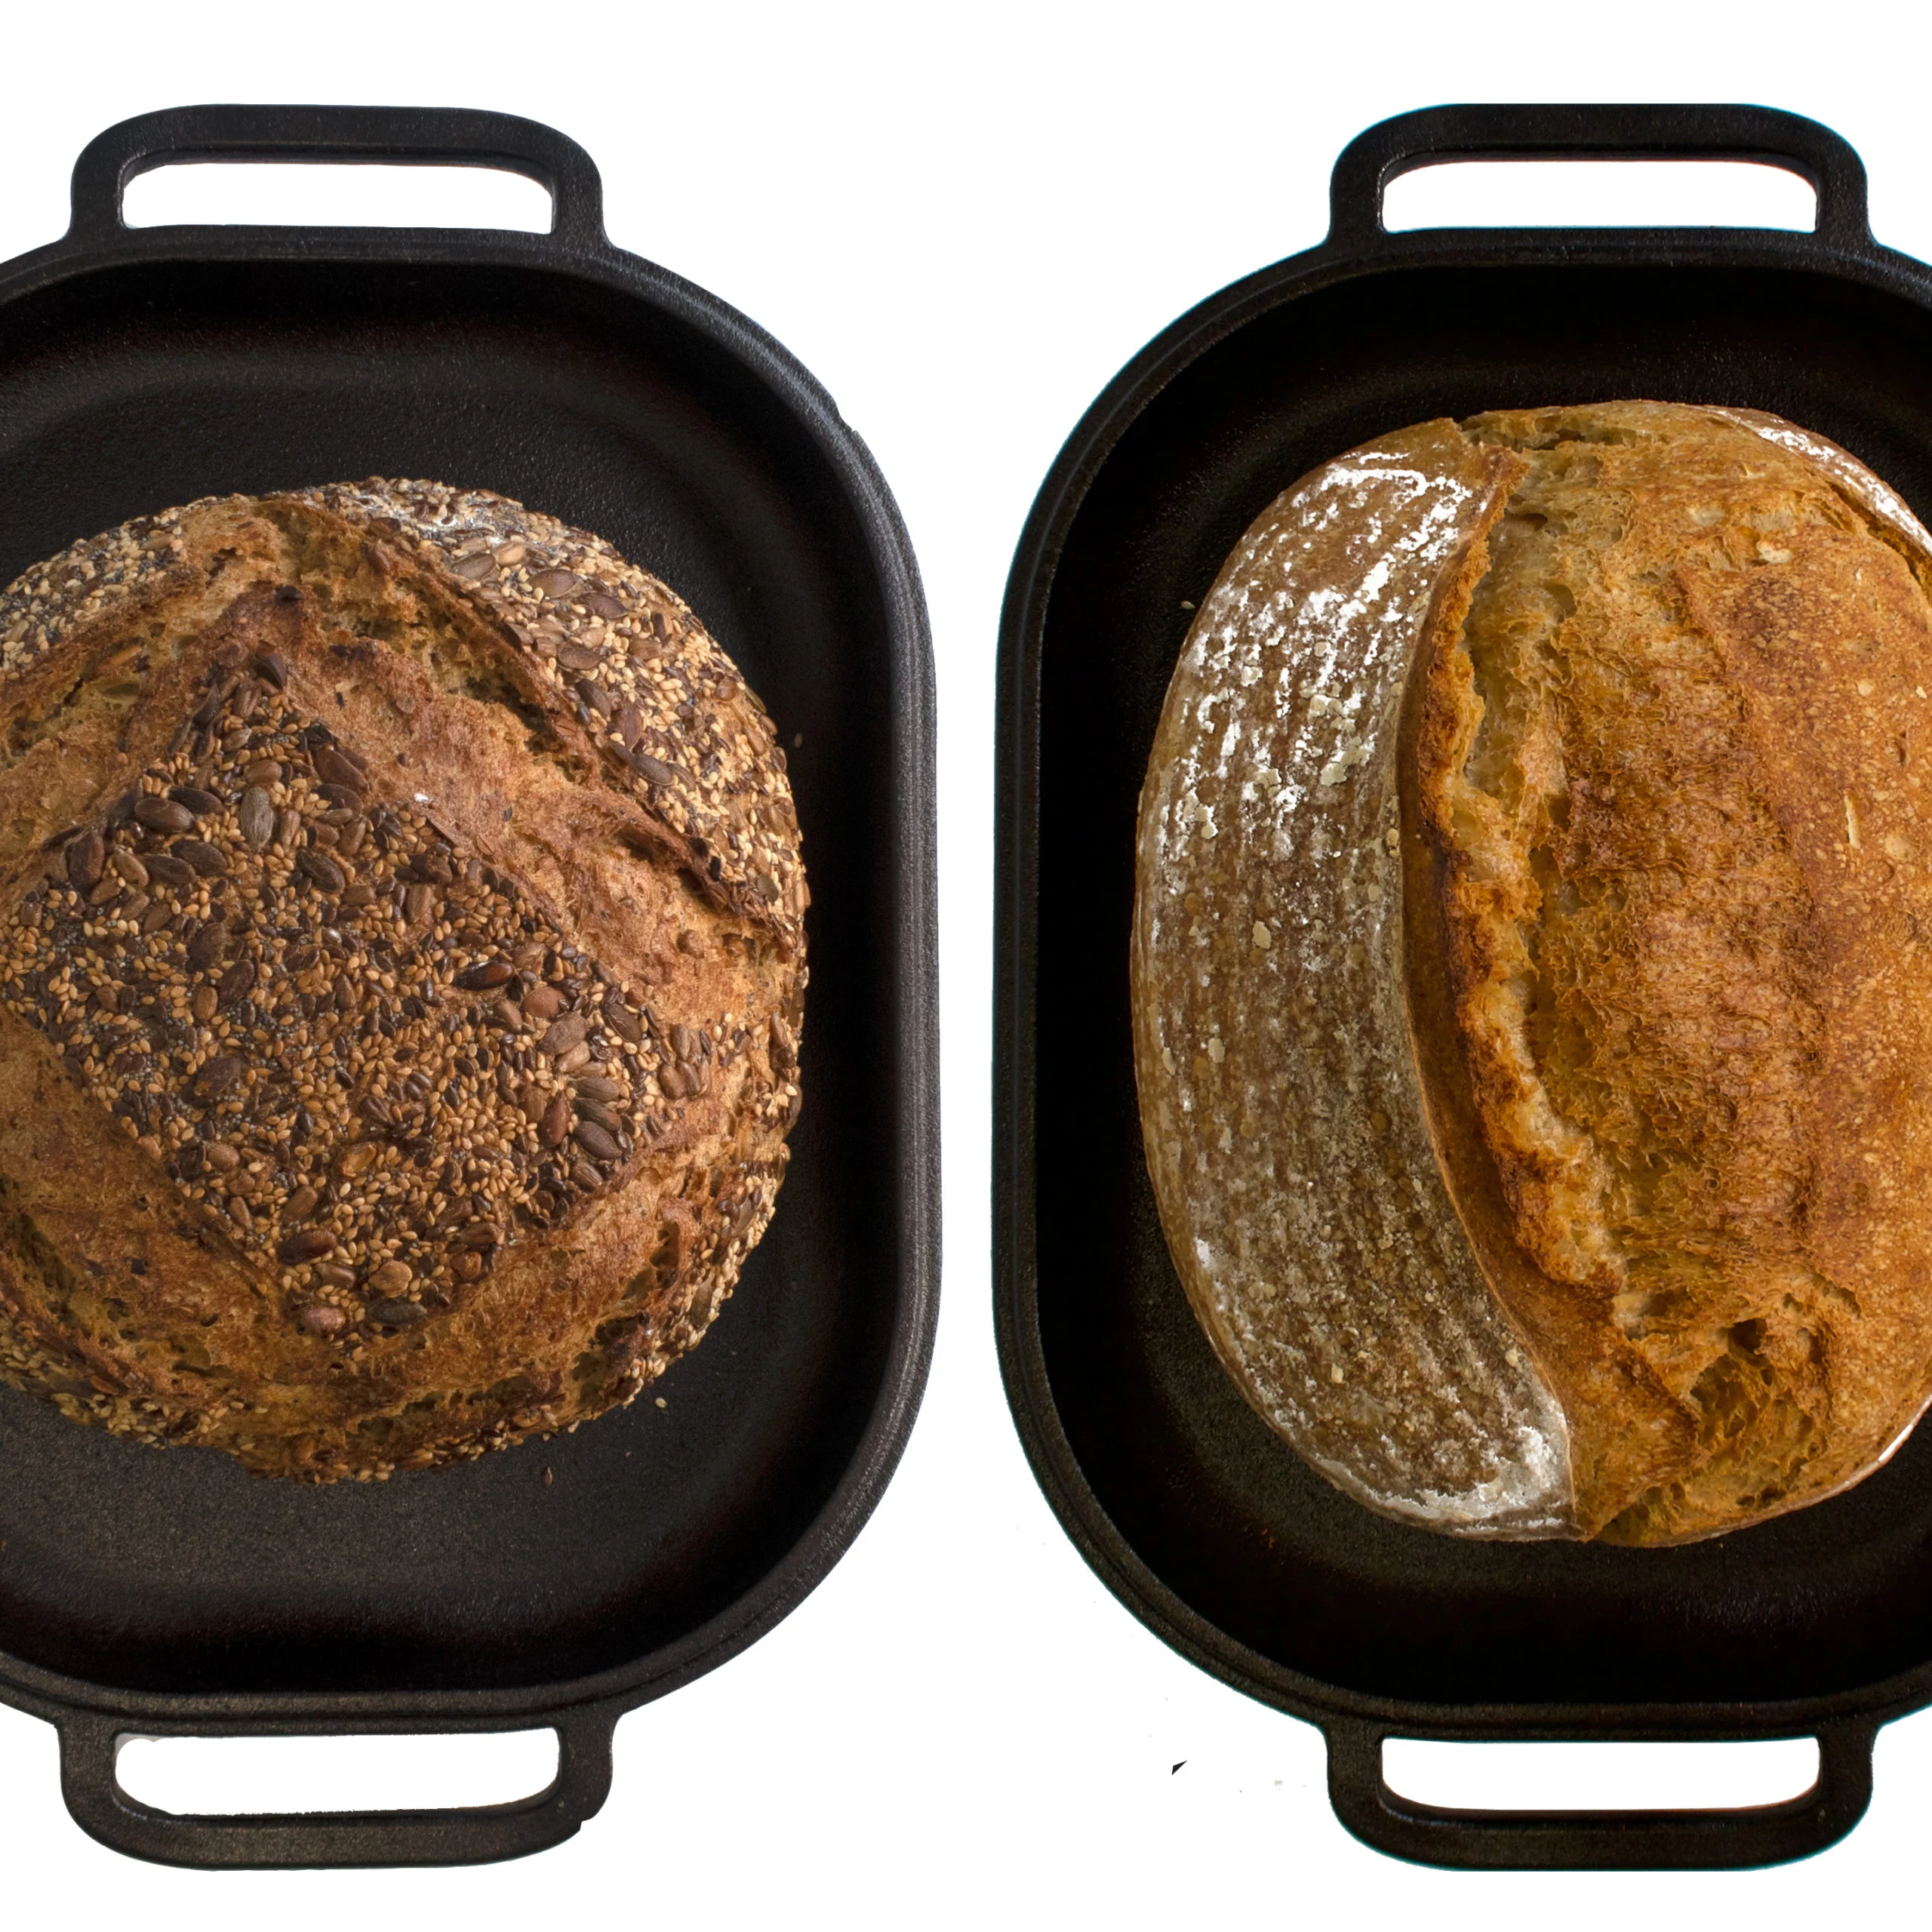 Challenger Bread Pan, Best thing since sliced bread?